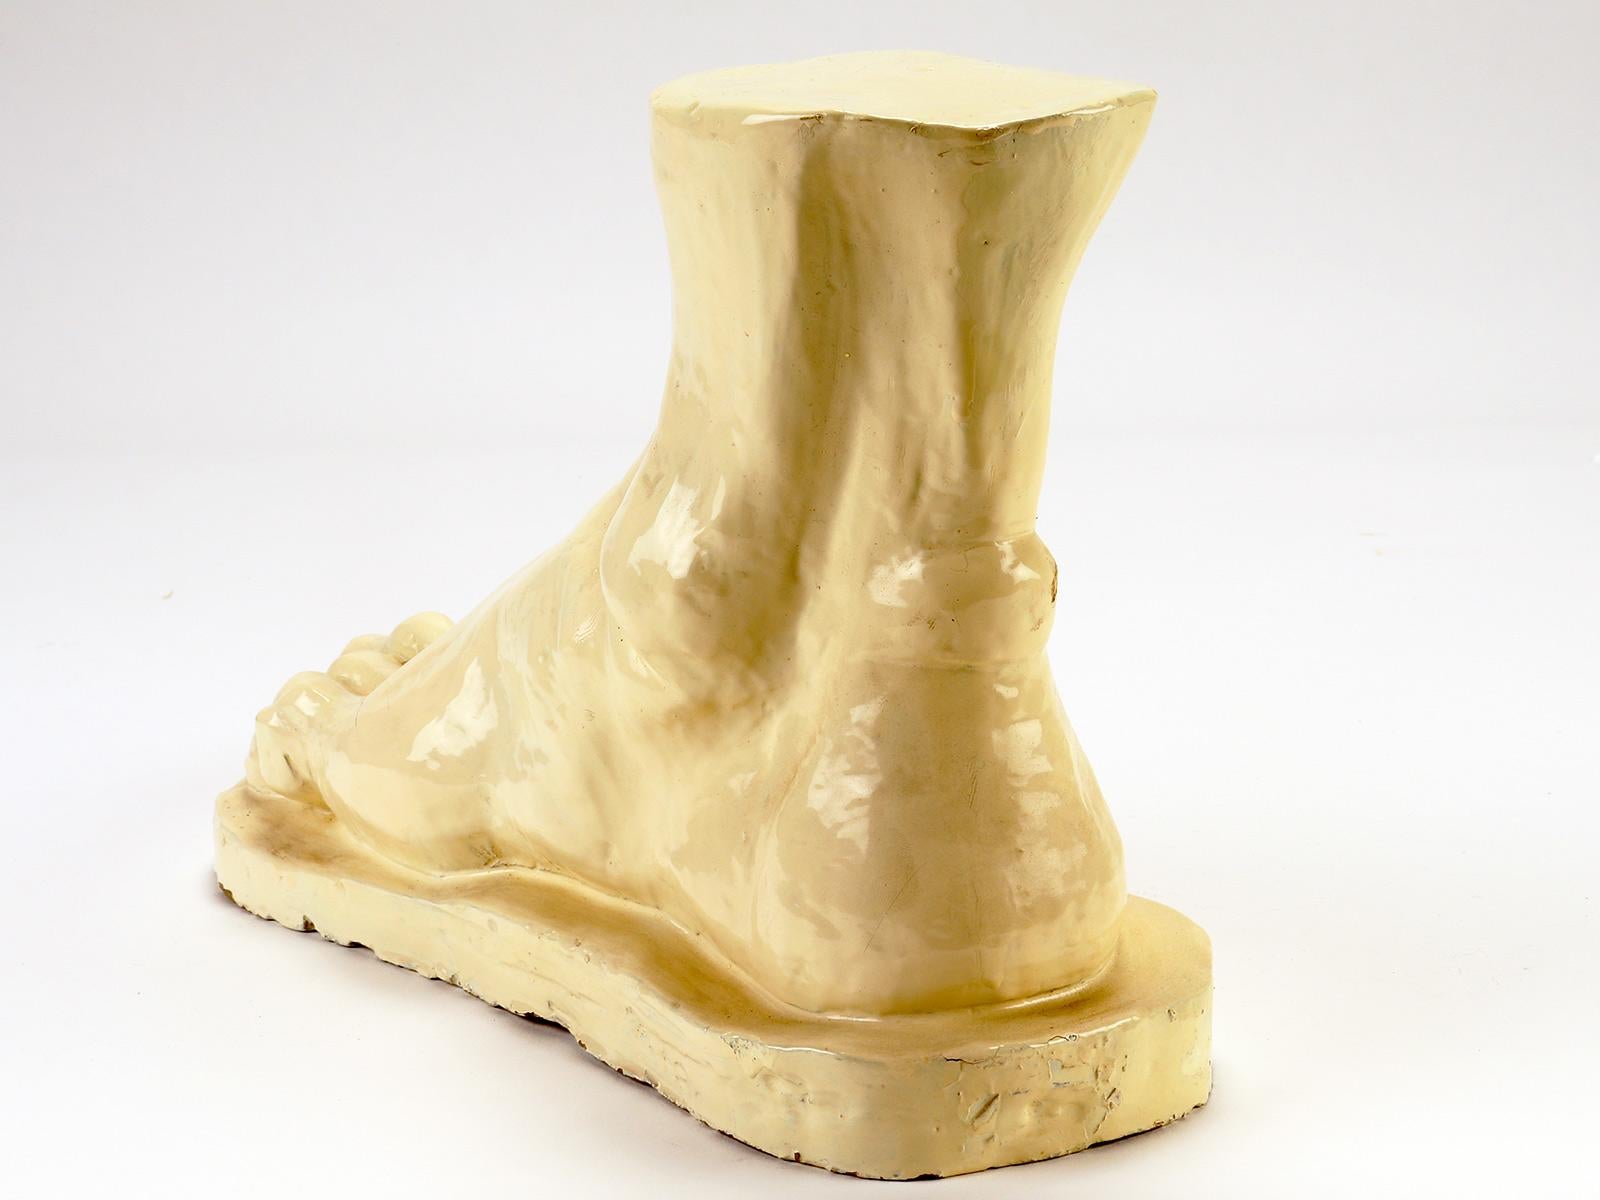 Glazed Clay Sculpture Depicting a Foot, Italy, 1900 For Sale 3